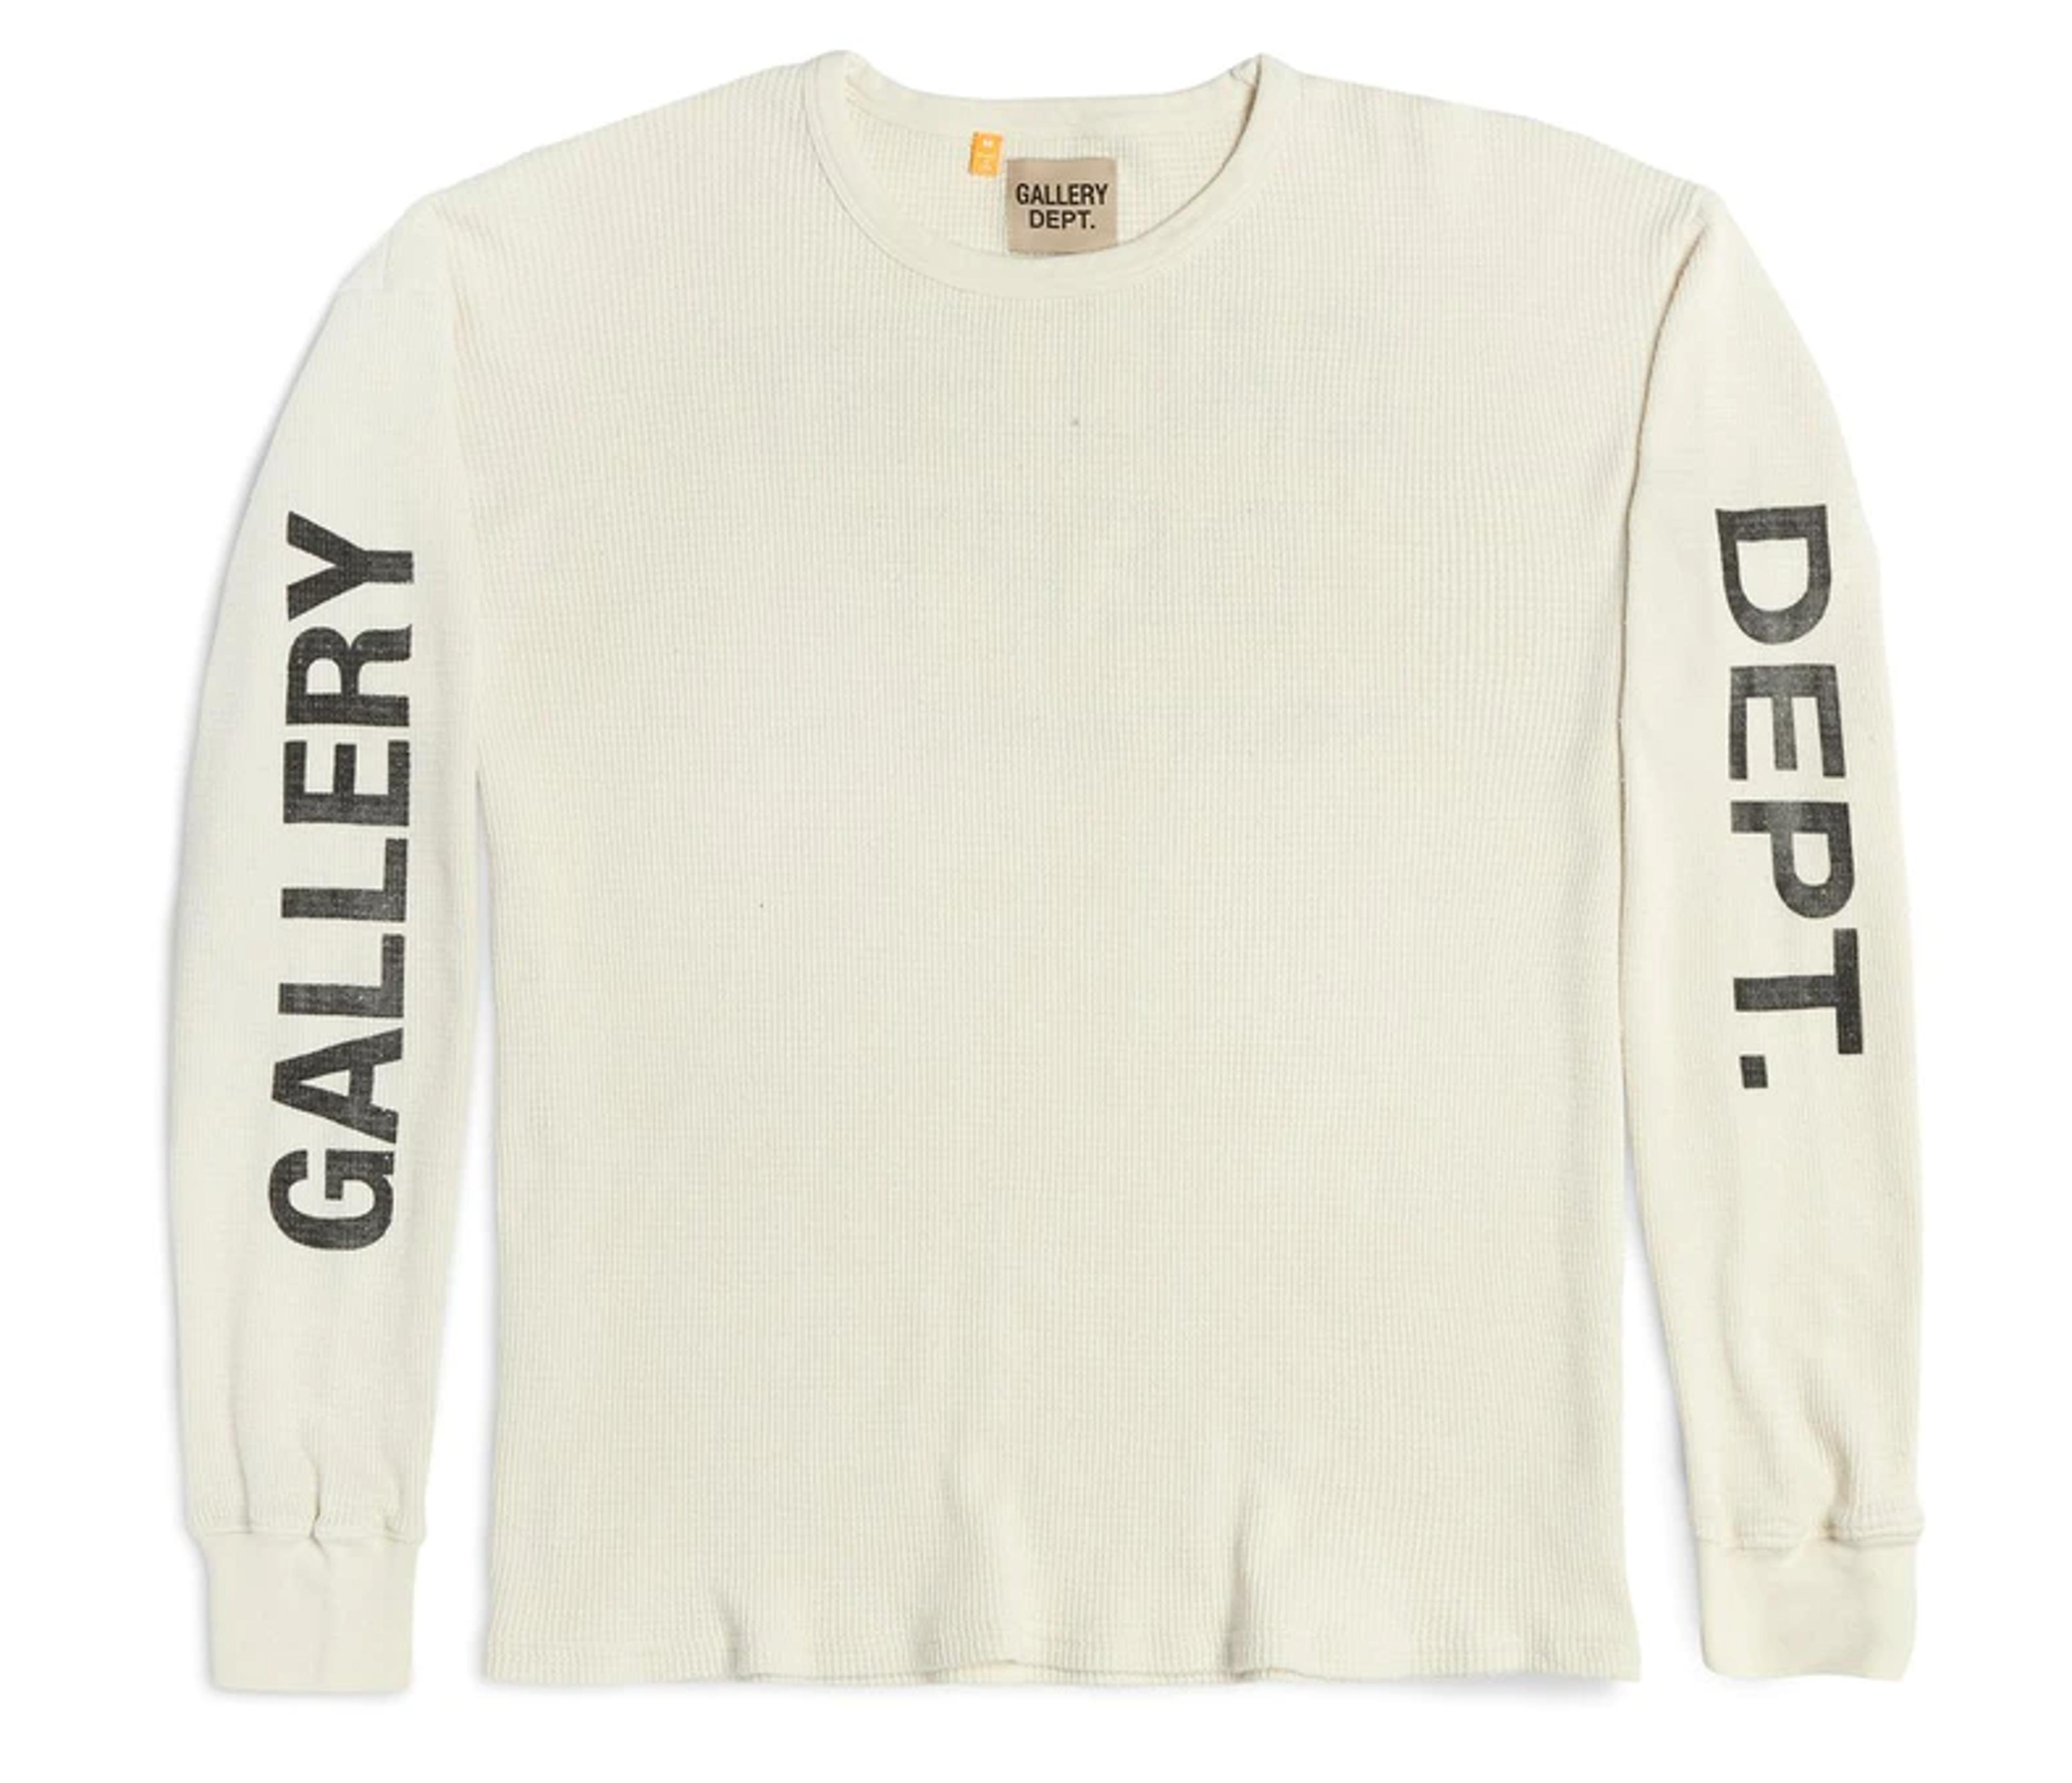 Alternate View 1 of Gallery Department Thermal Long Sleeve Tee Shirt White